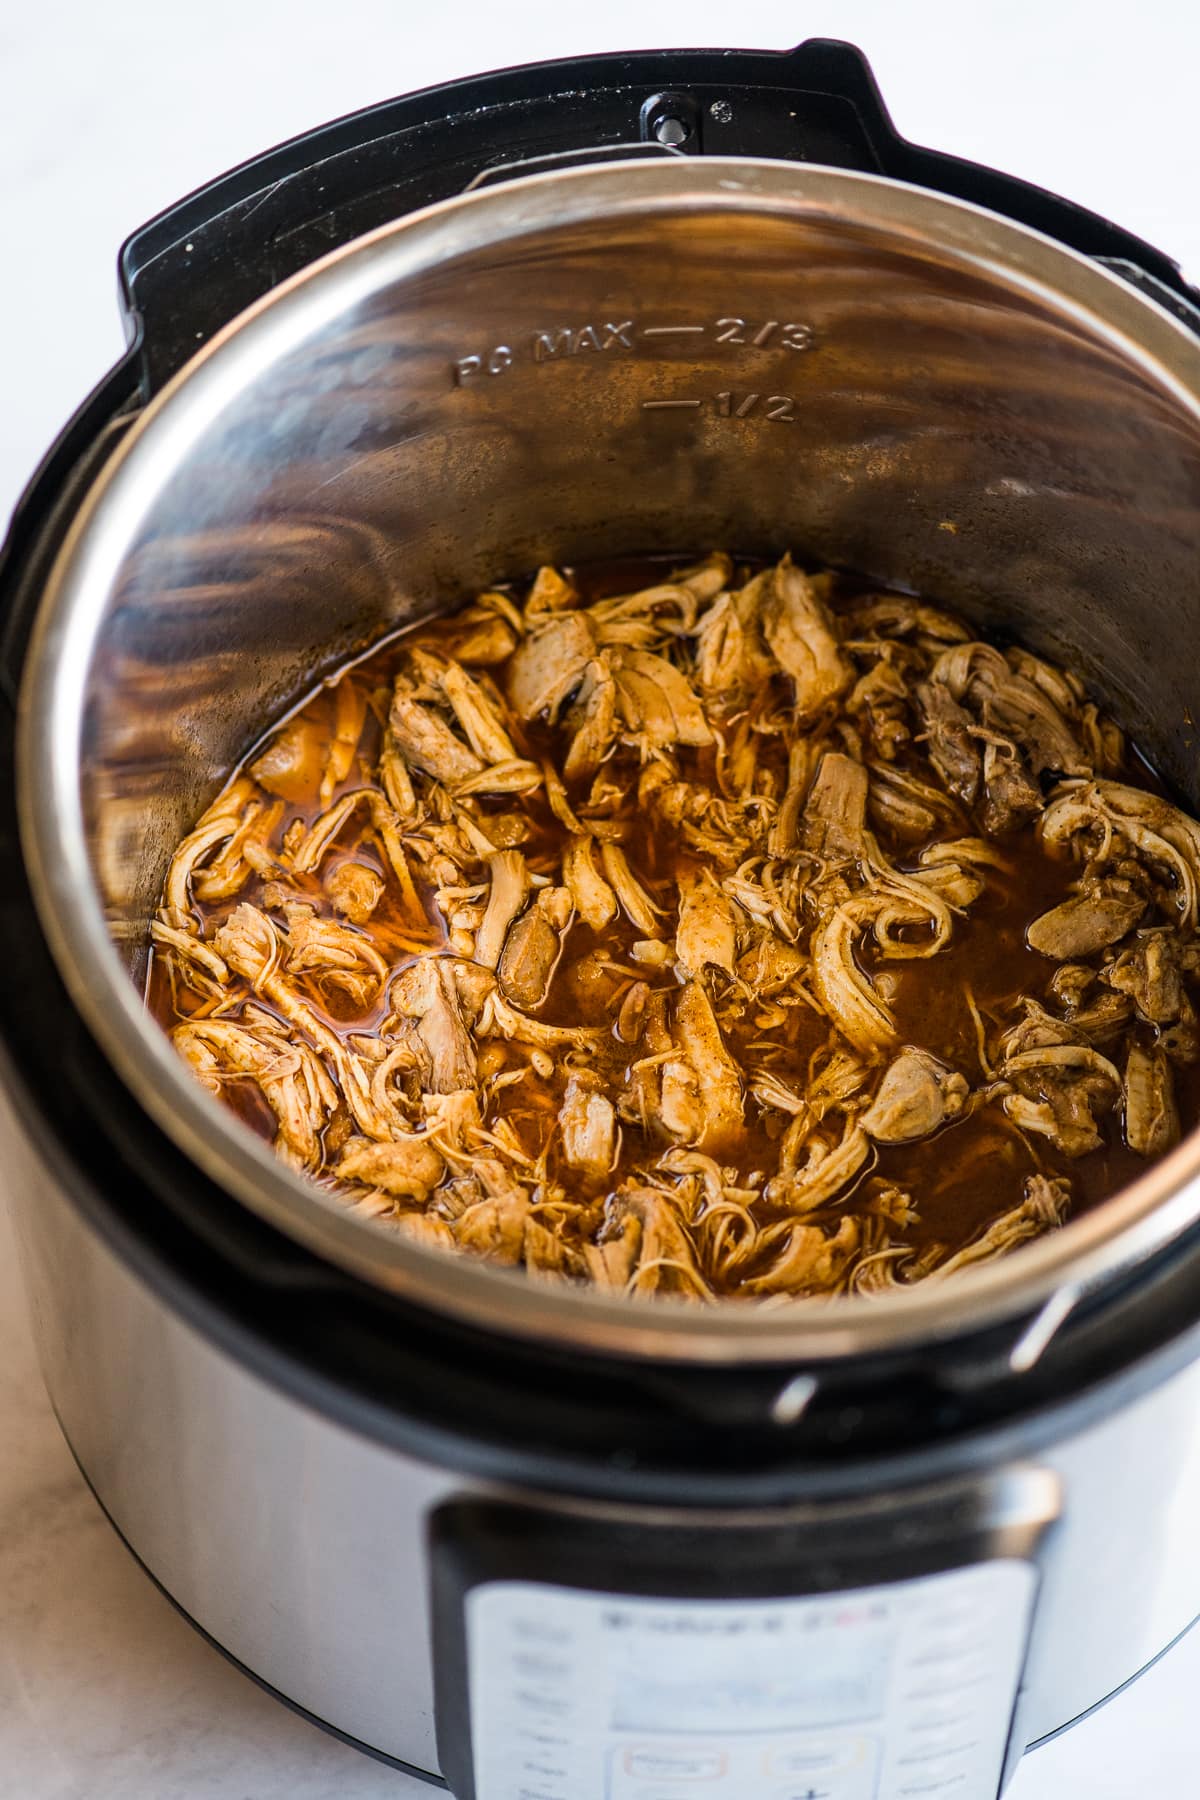 Shredded chicken thighs in the Instant Pot pressure cooker for tacos.